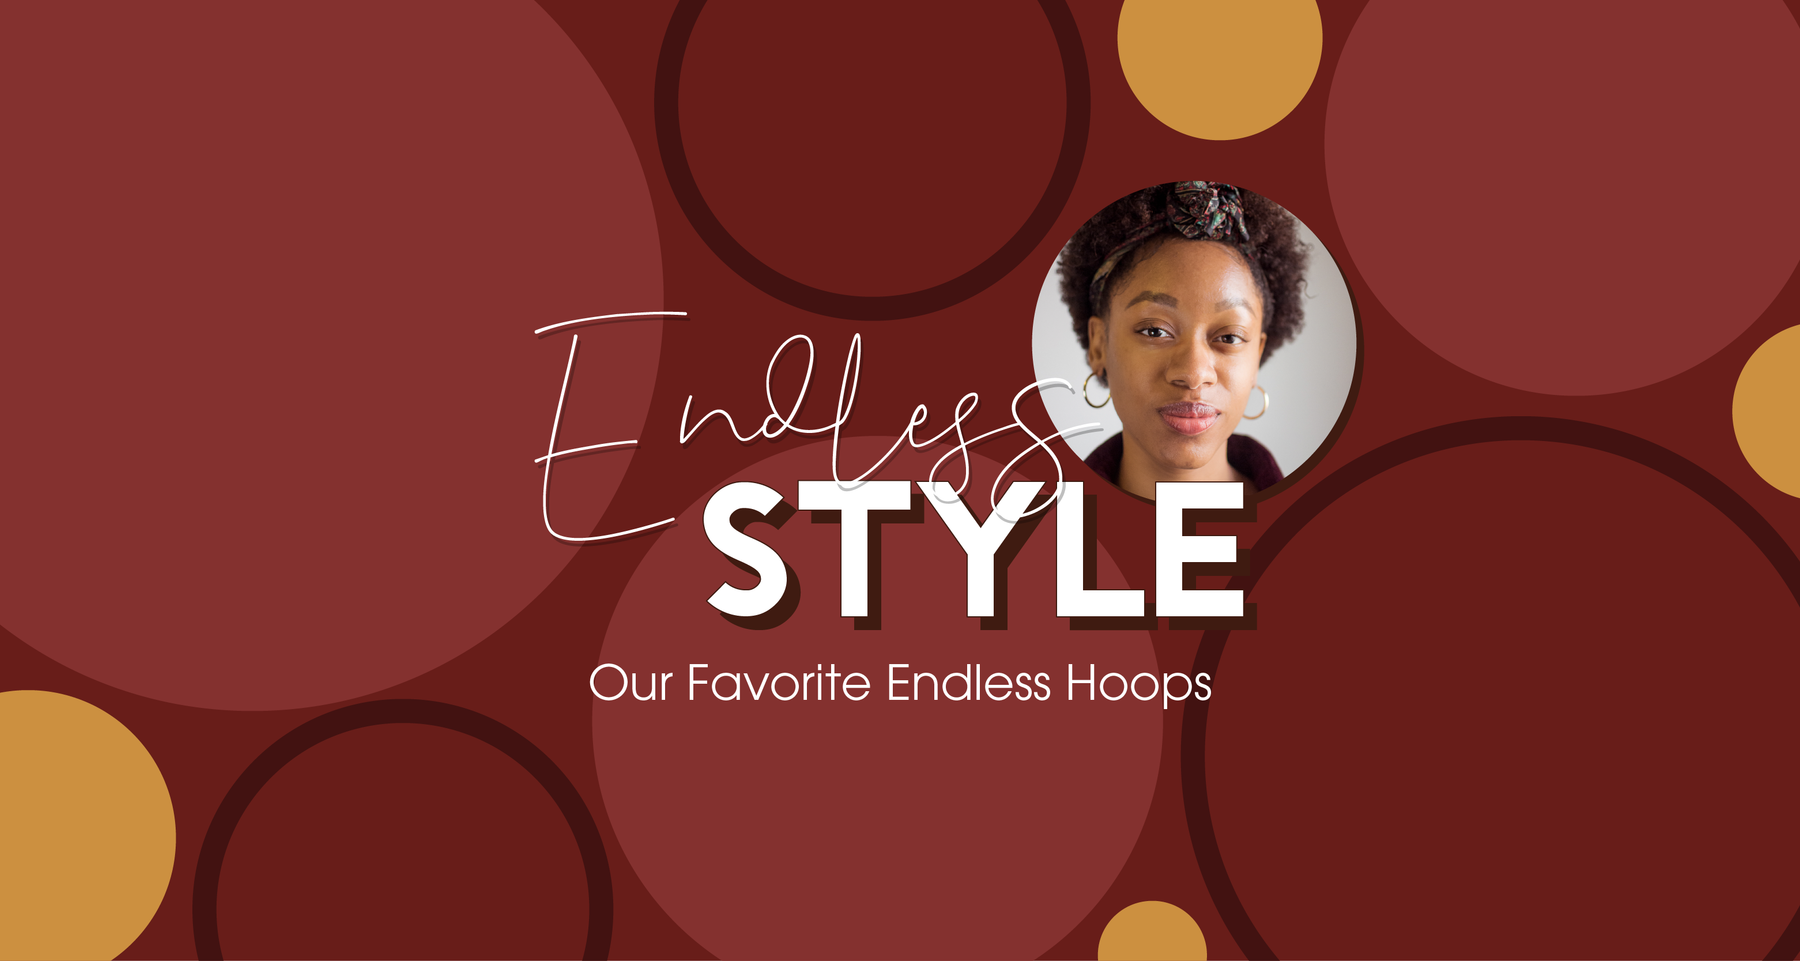 Endless Style: Our Favorite Endless Hoops